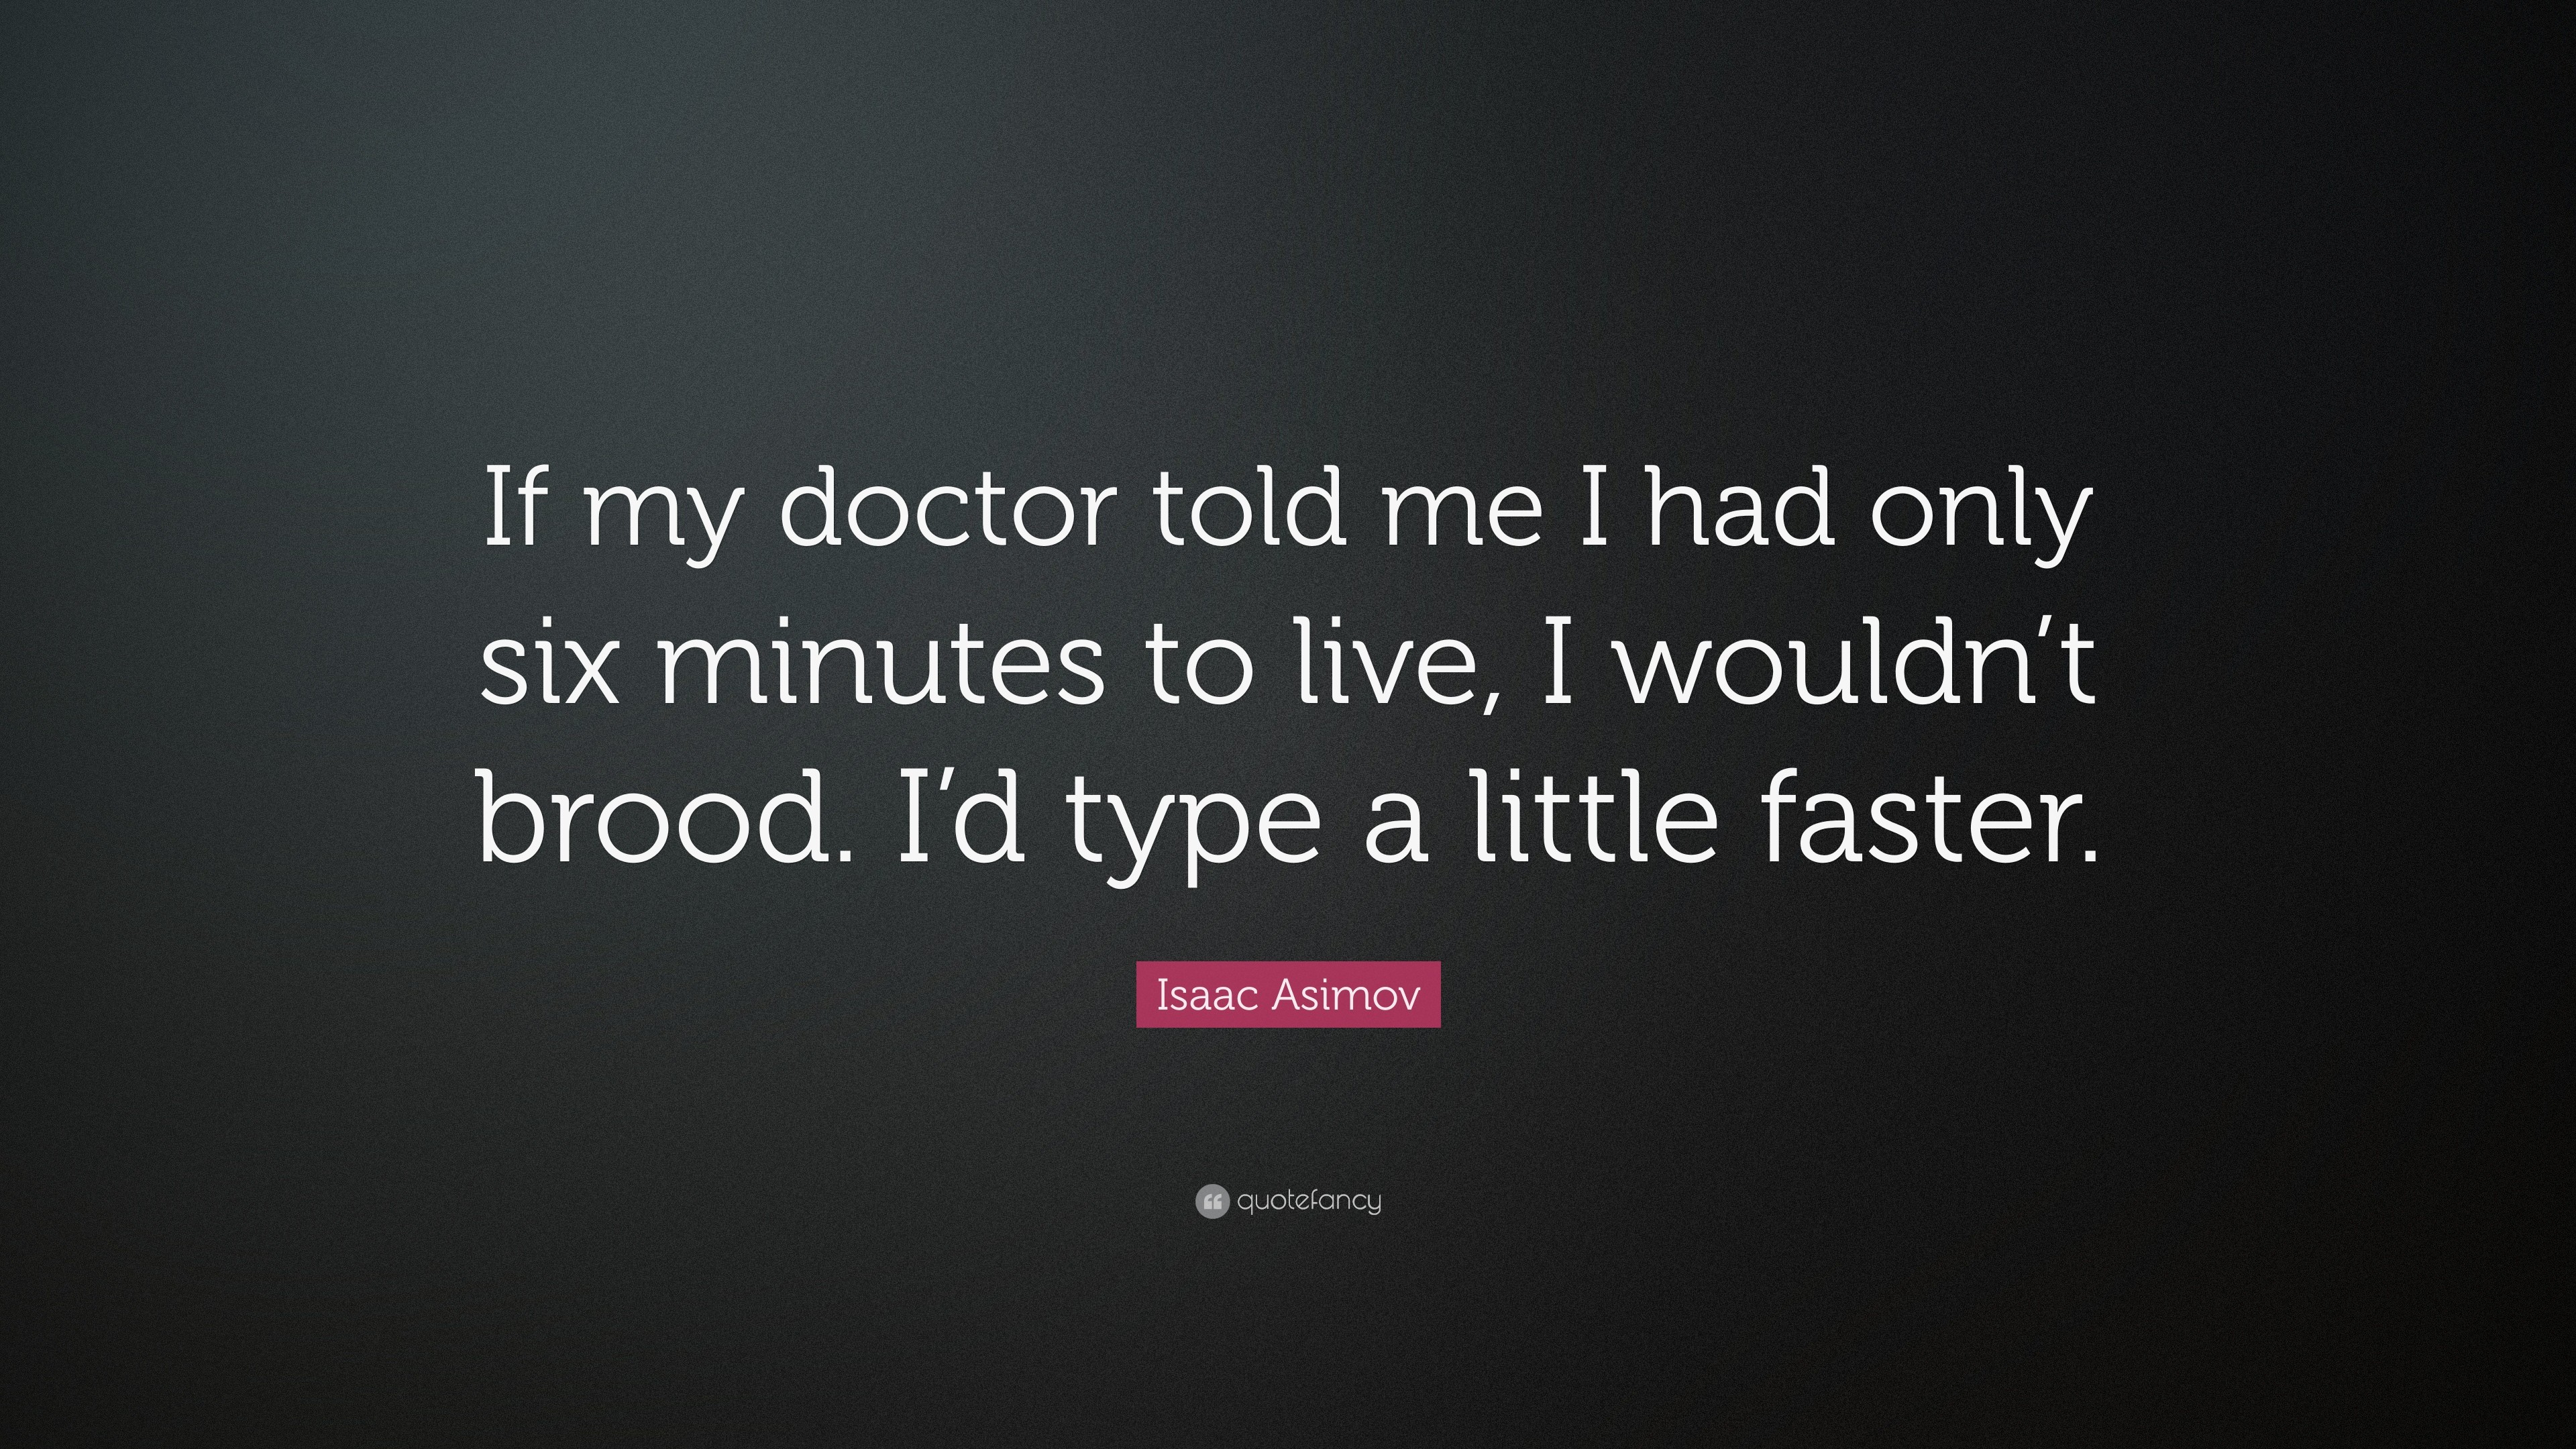 3840x2160 Isaac Asimov Quote: “If my doctor told me I had only six minutes to